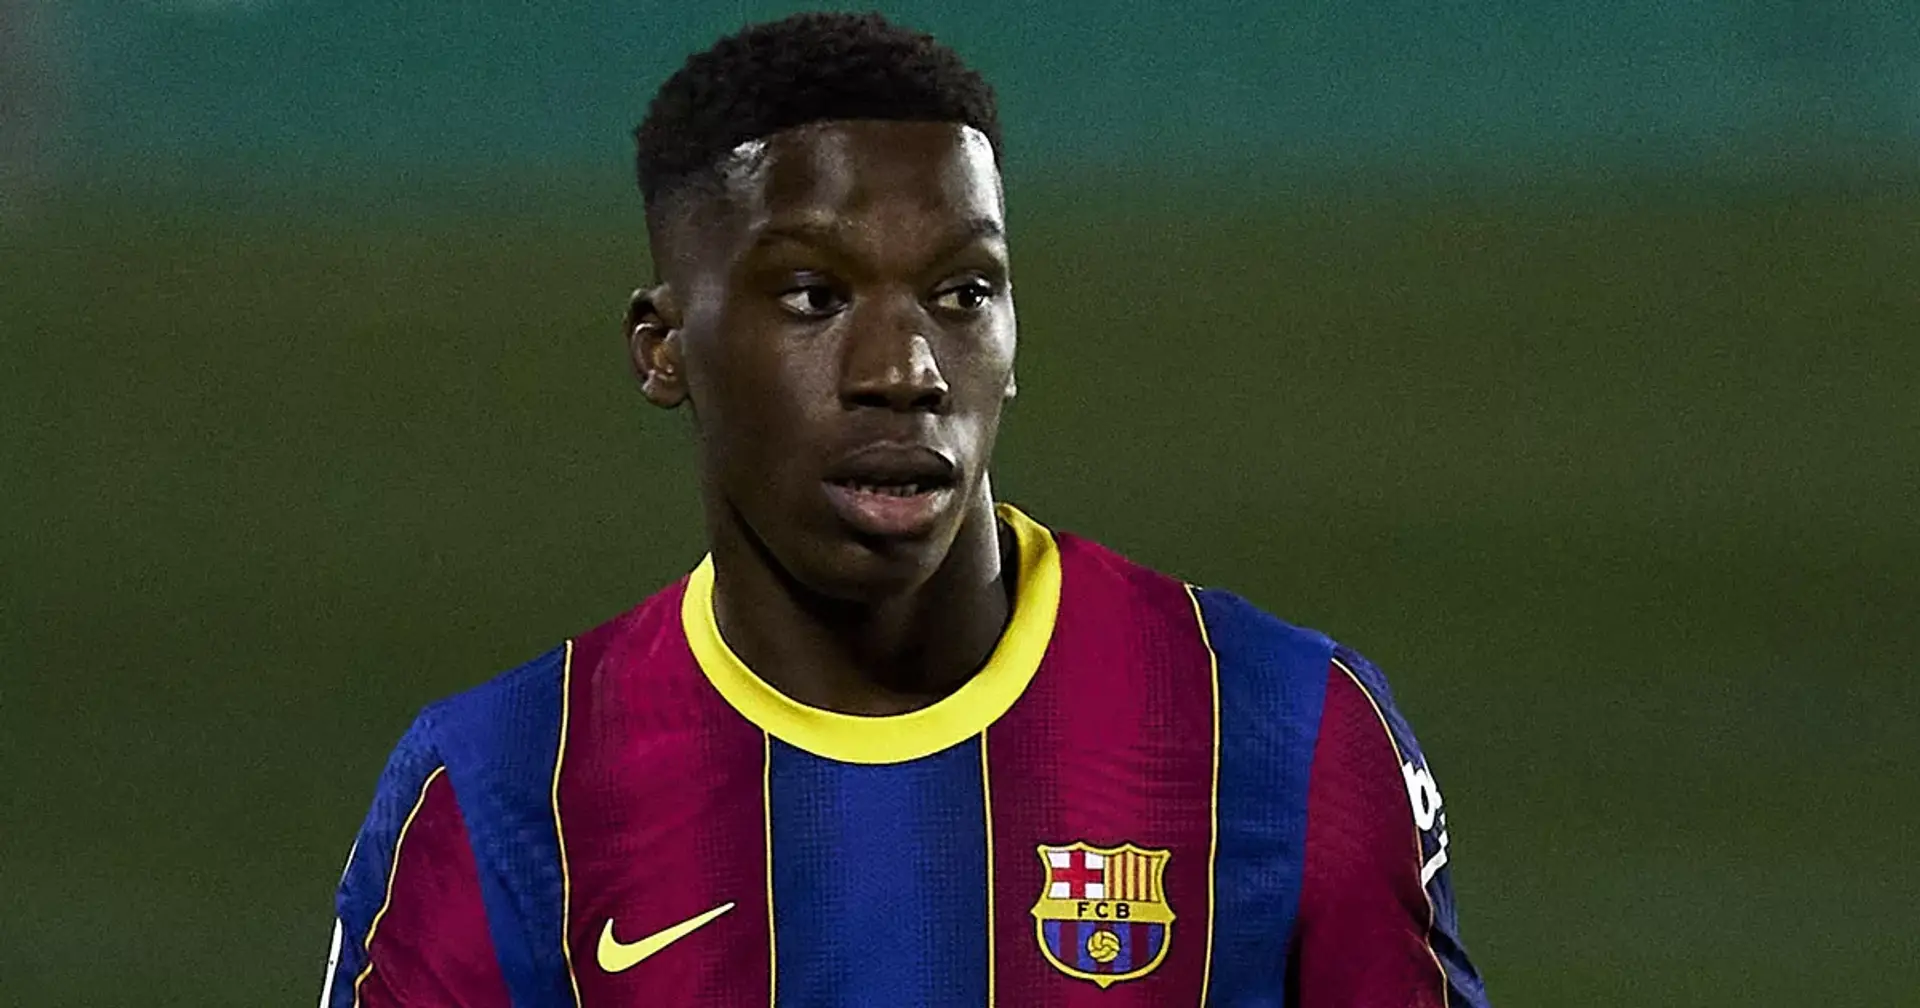 'I will never forget it!': Ilaix Moriba sends message after Barcelona debut